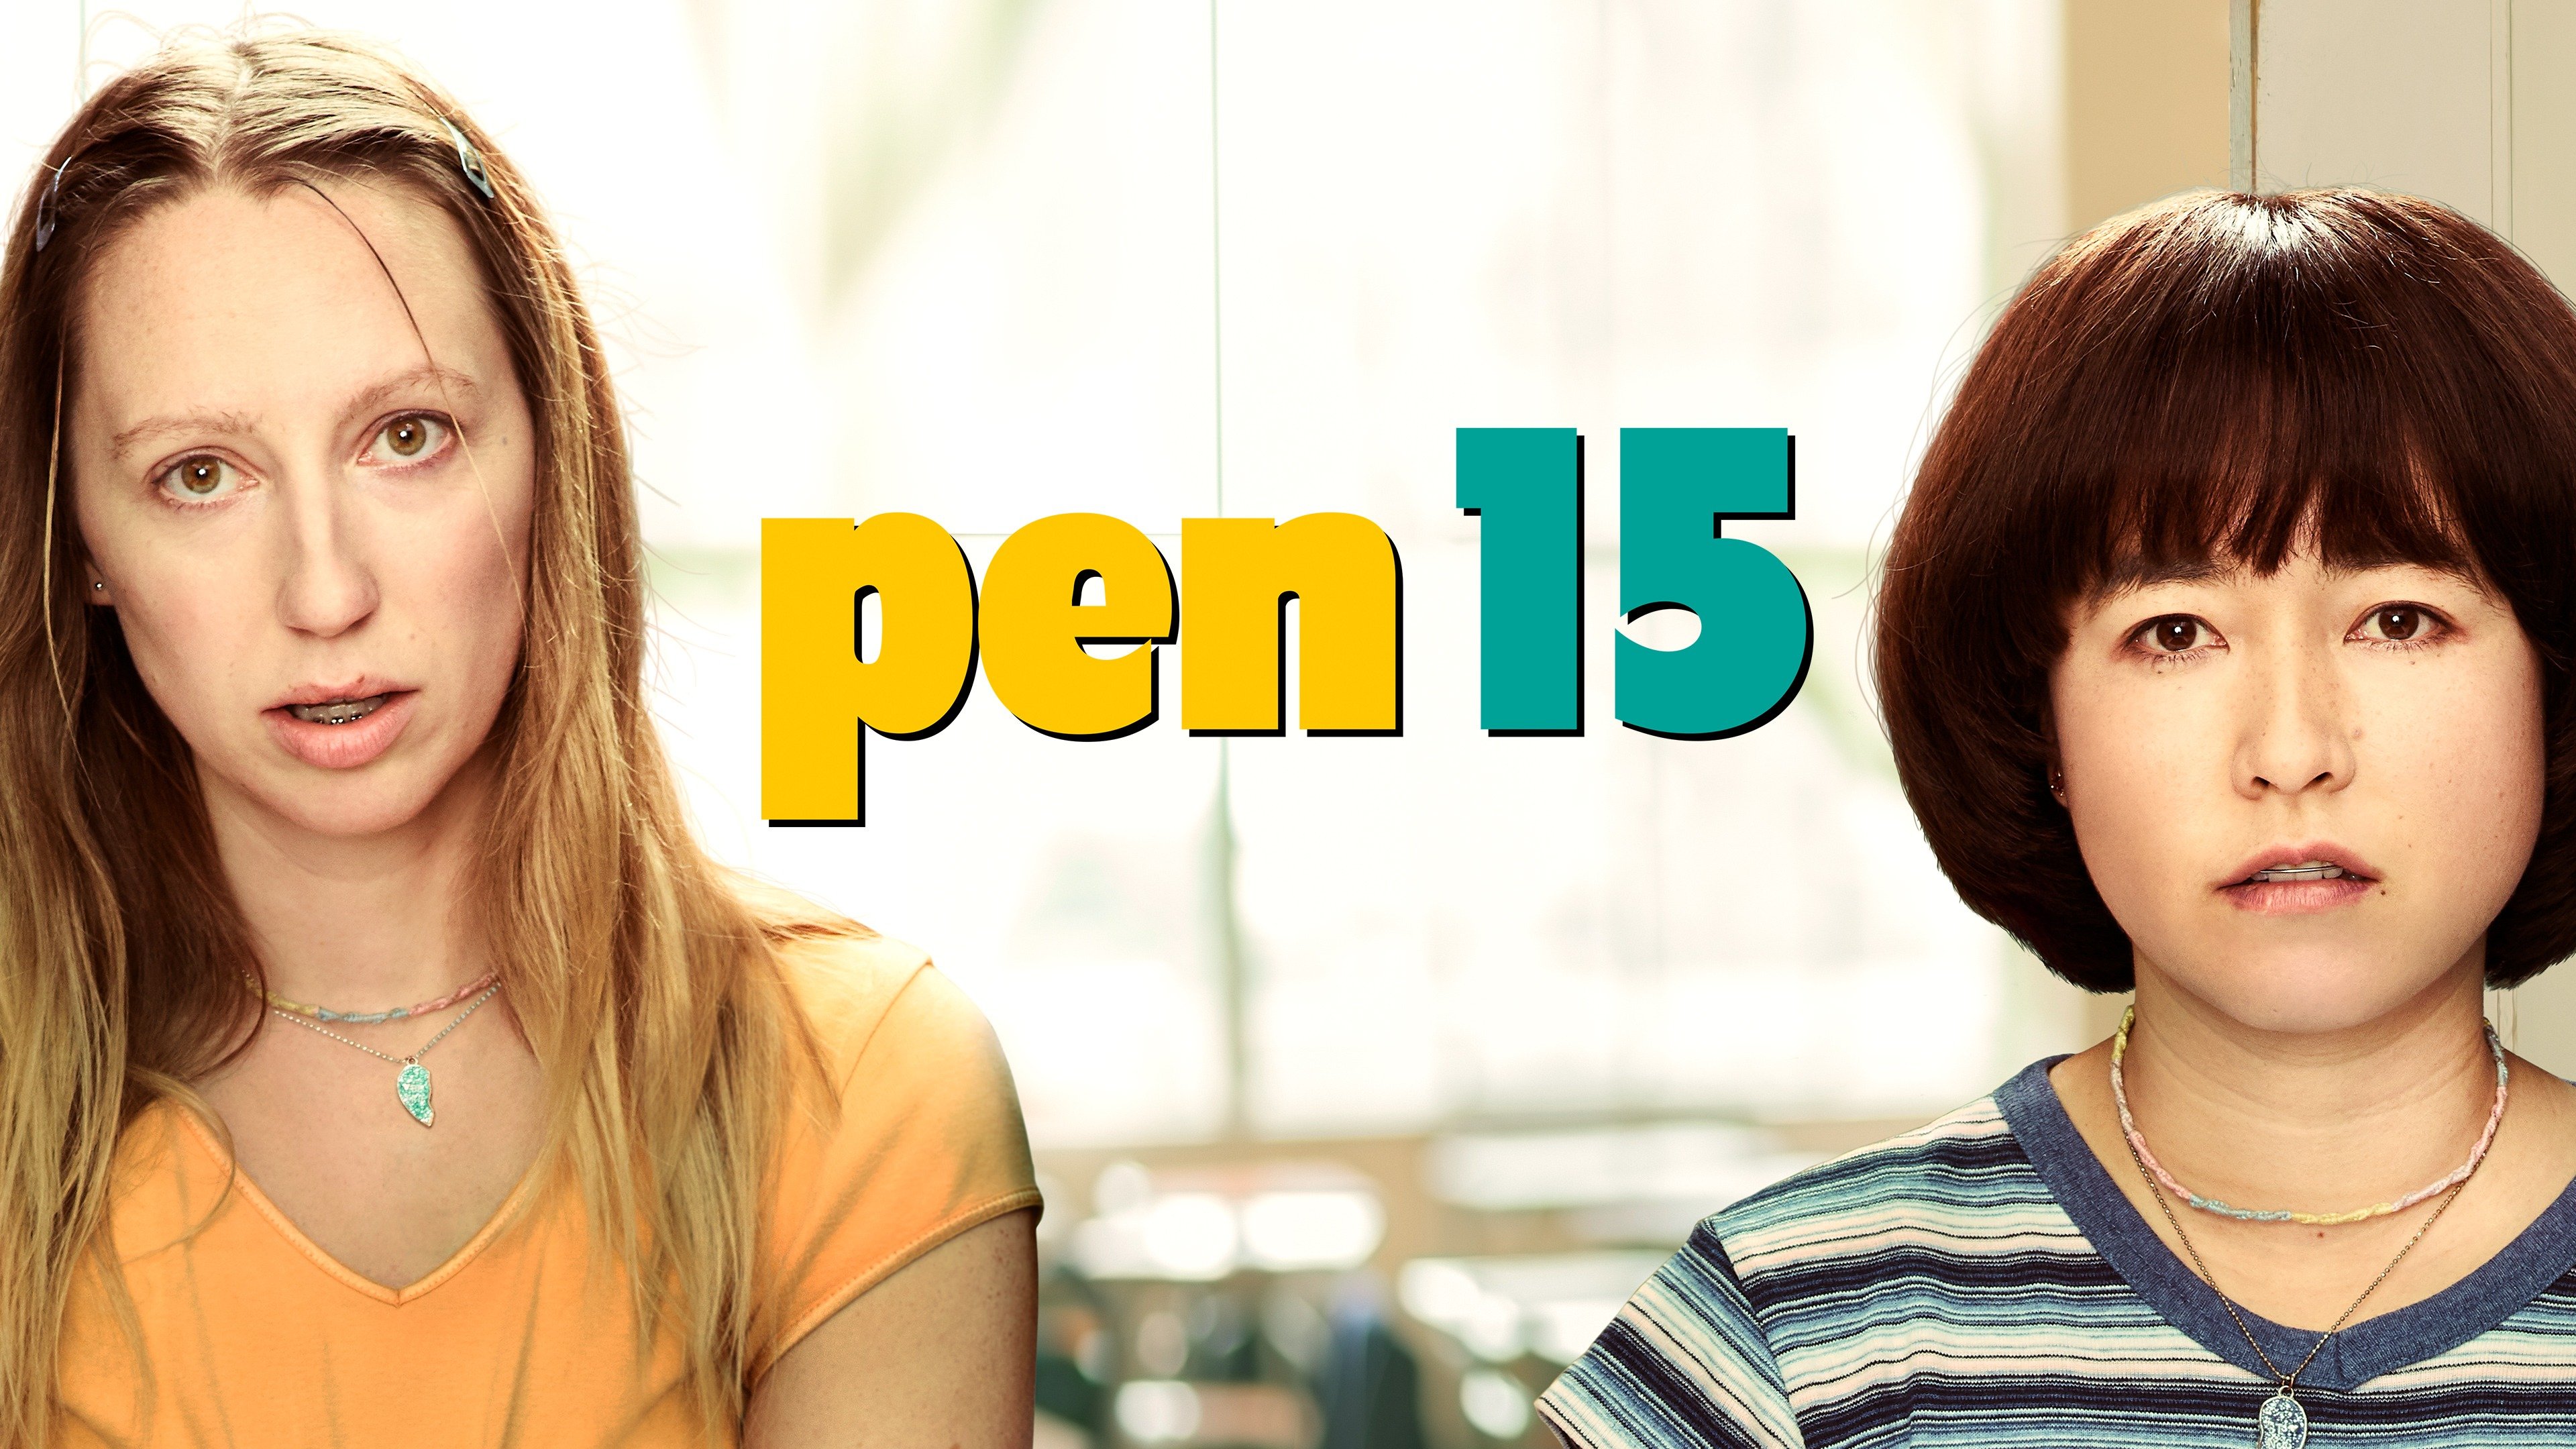 PEN15 - two girls with "shock' emotions